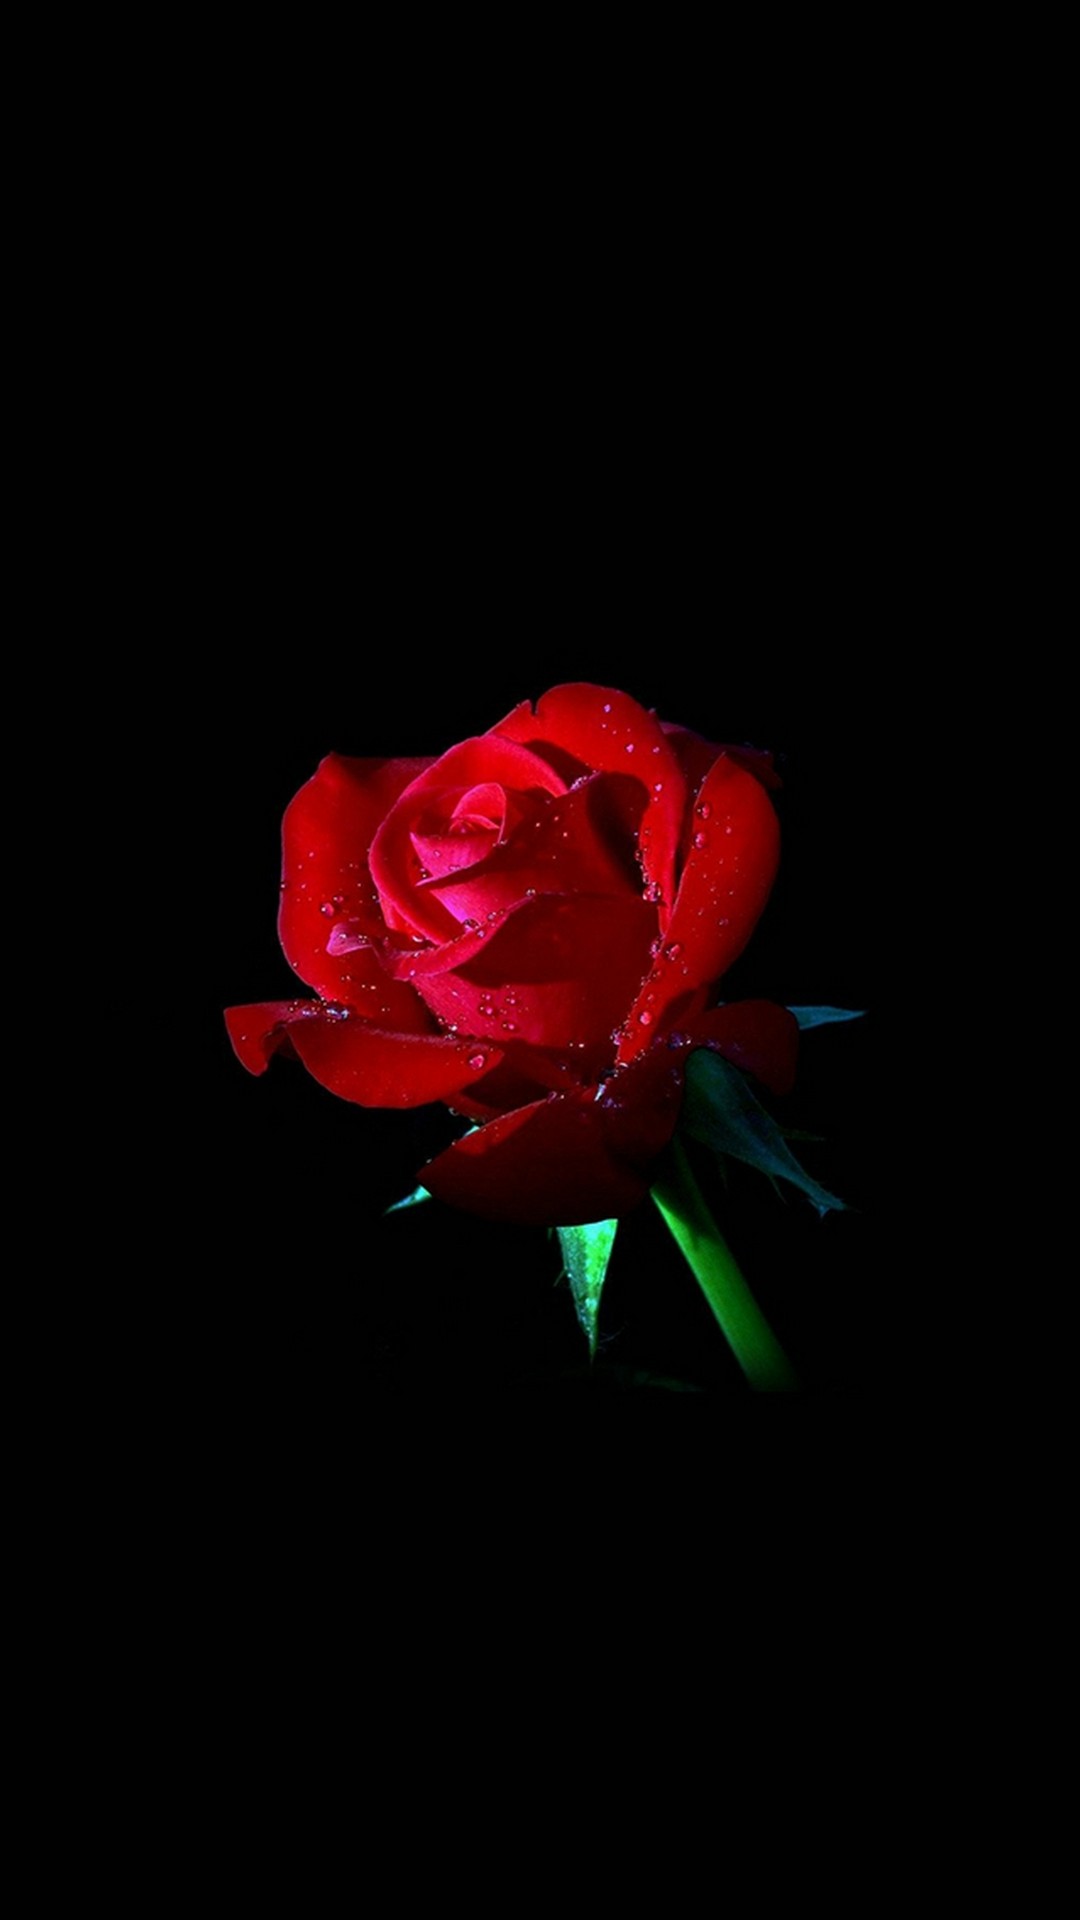 Cool Dark iPhone Wallpaper Lock Screen With high-resolution 1080X1920 pixel. You can set as wallpaper for Apple iPhone X, XS Max, XR, 8, 7, 6, SE, iPad. Enjoy and share your favorite HD wallpapers and background images